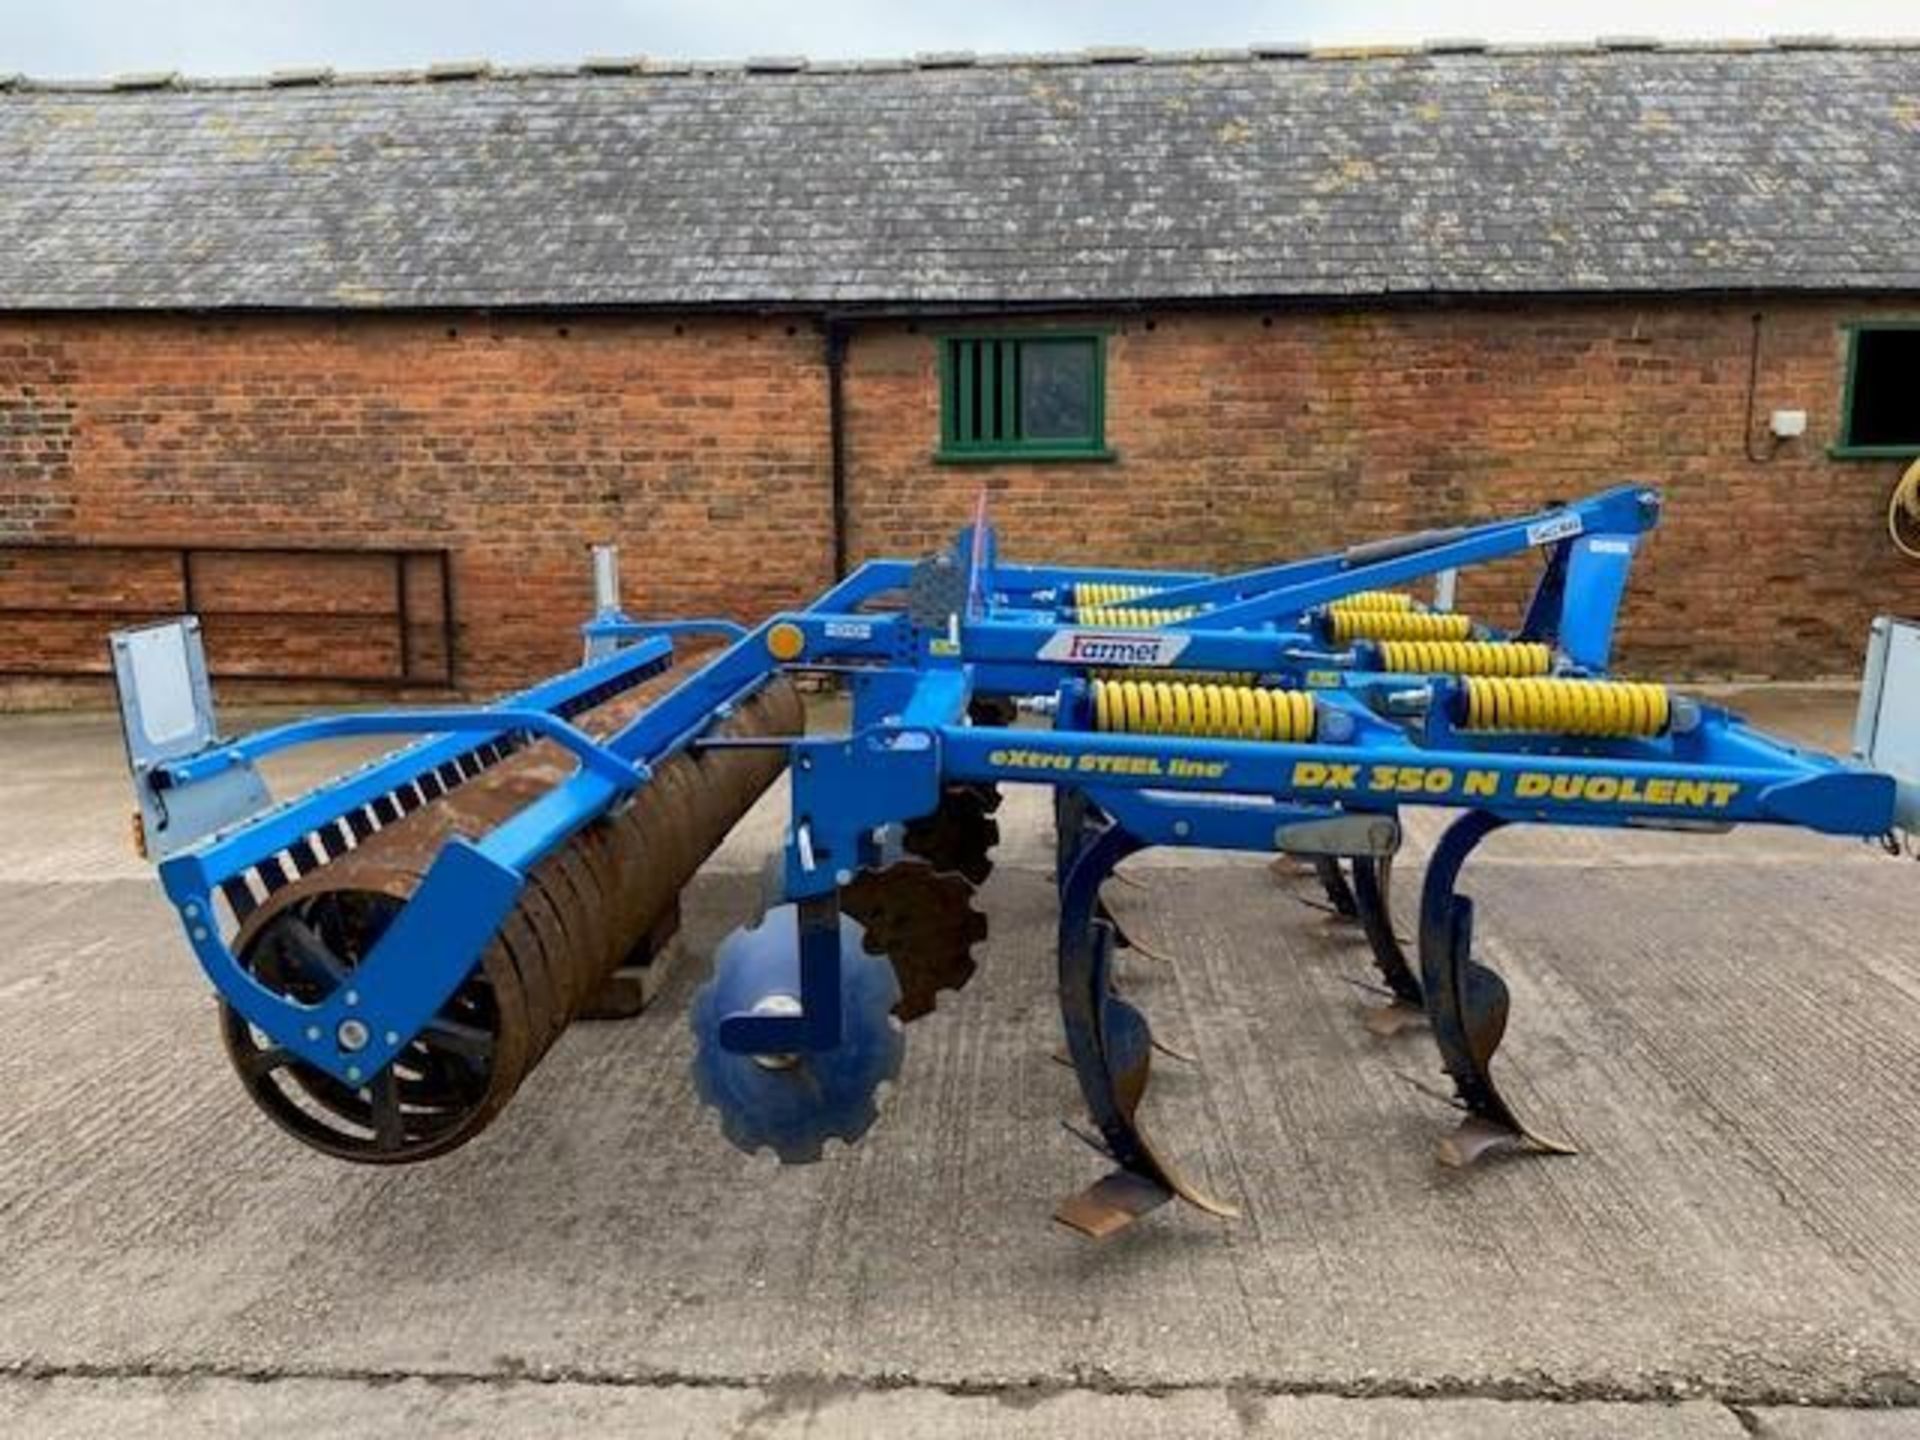 2021 Farmet DX 350 N Duolent tine cultivator - Image 2 of 3